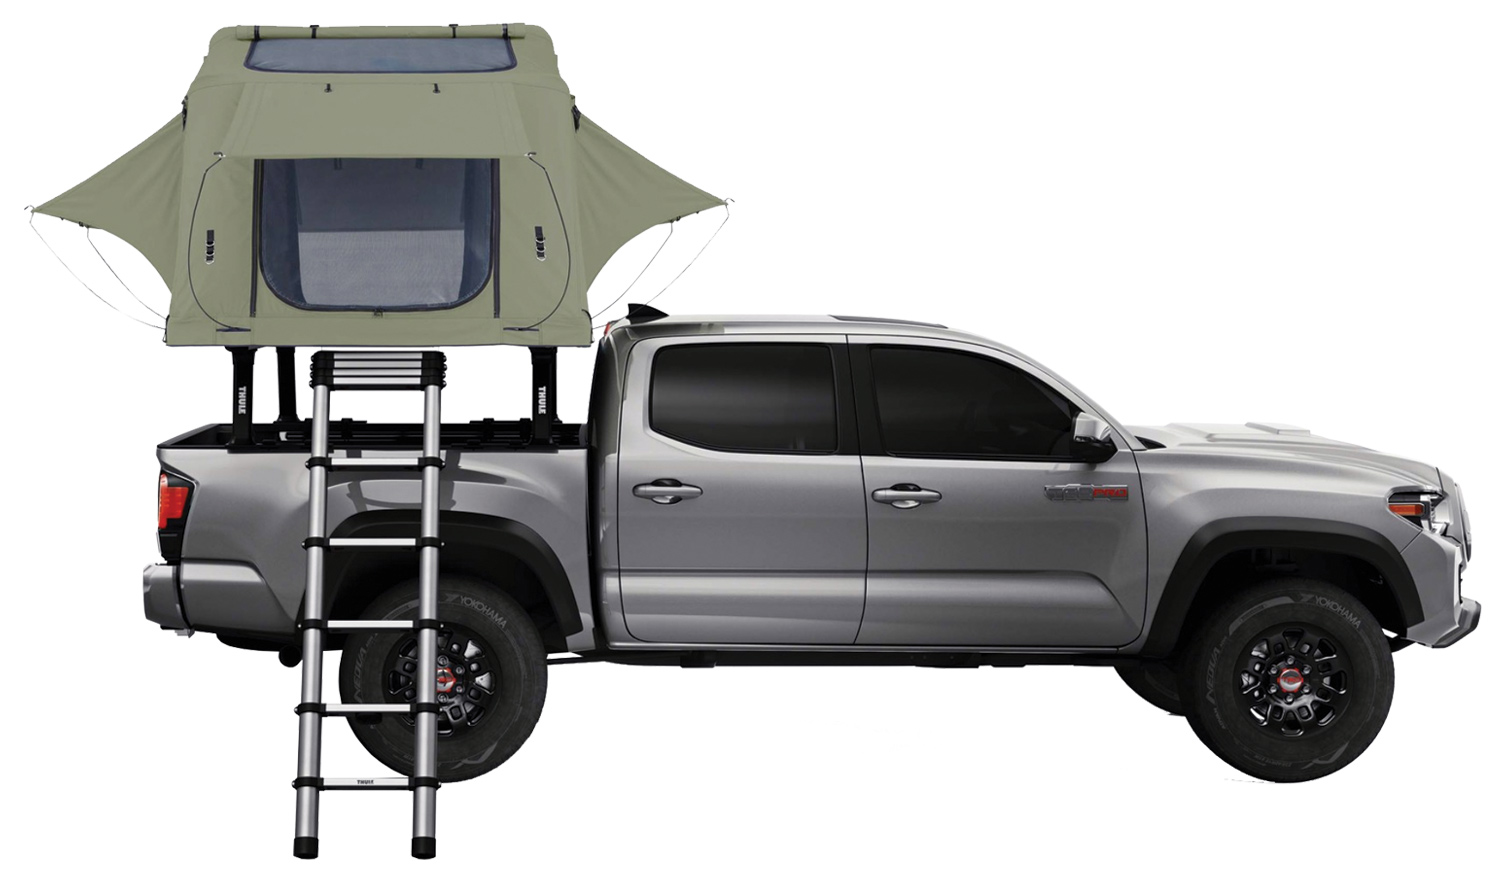 products from Summit Racing’s Overlanding Section installed on a truck